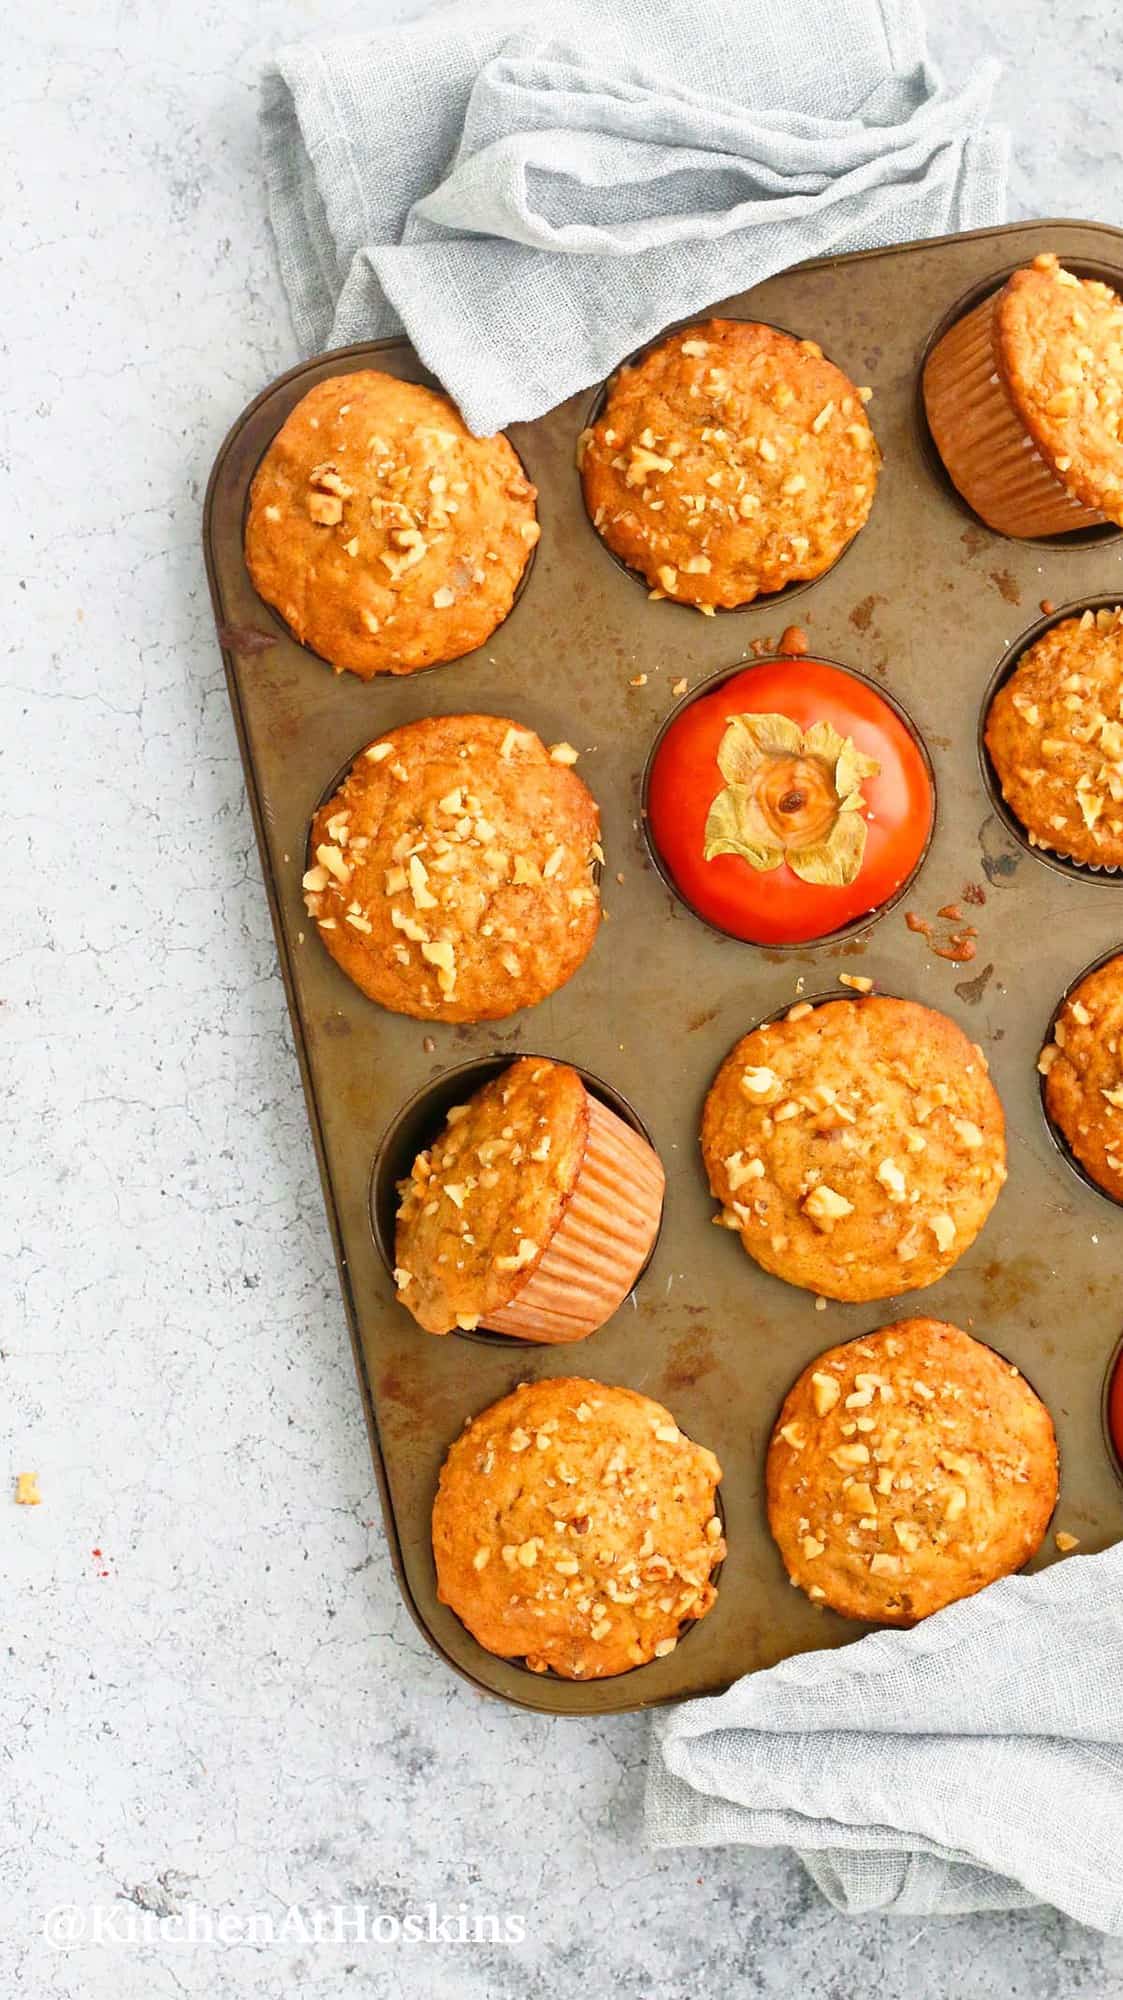 muffin pan with baked persimmon walnut muffins and persimmons.